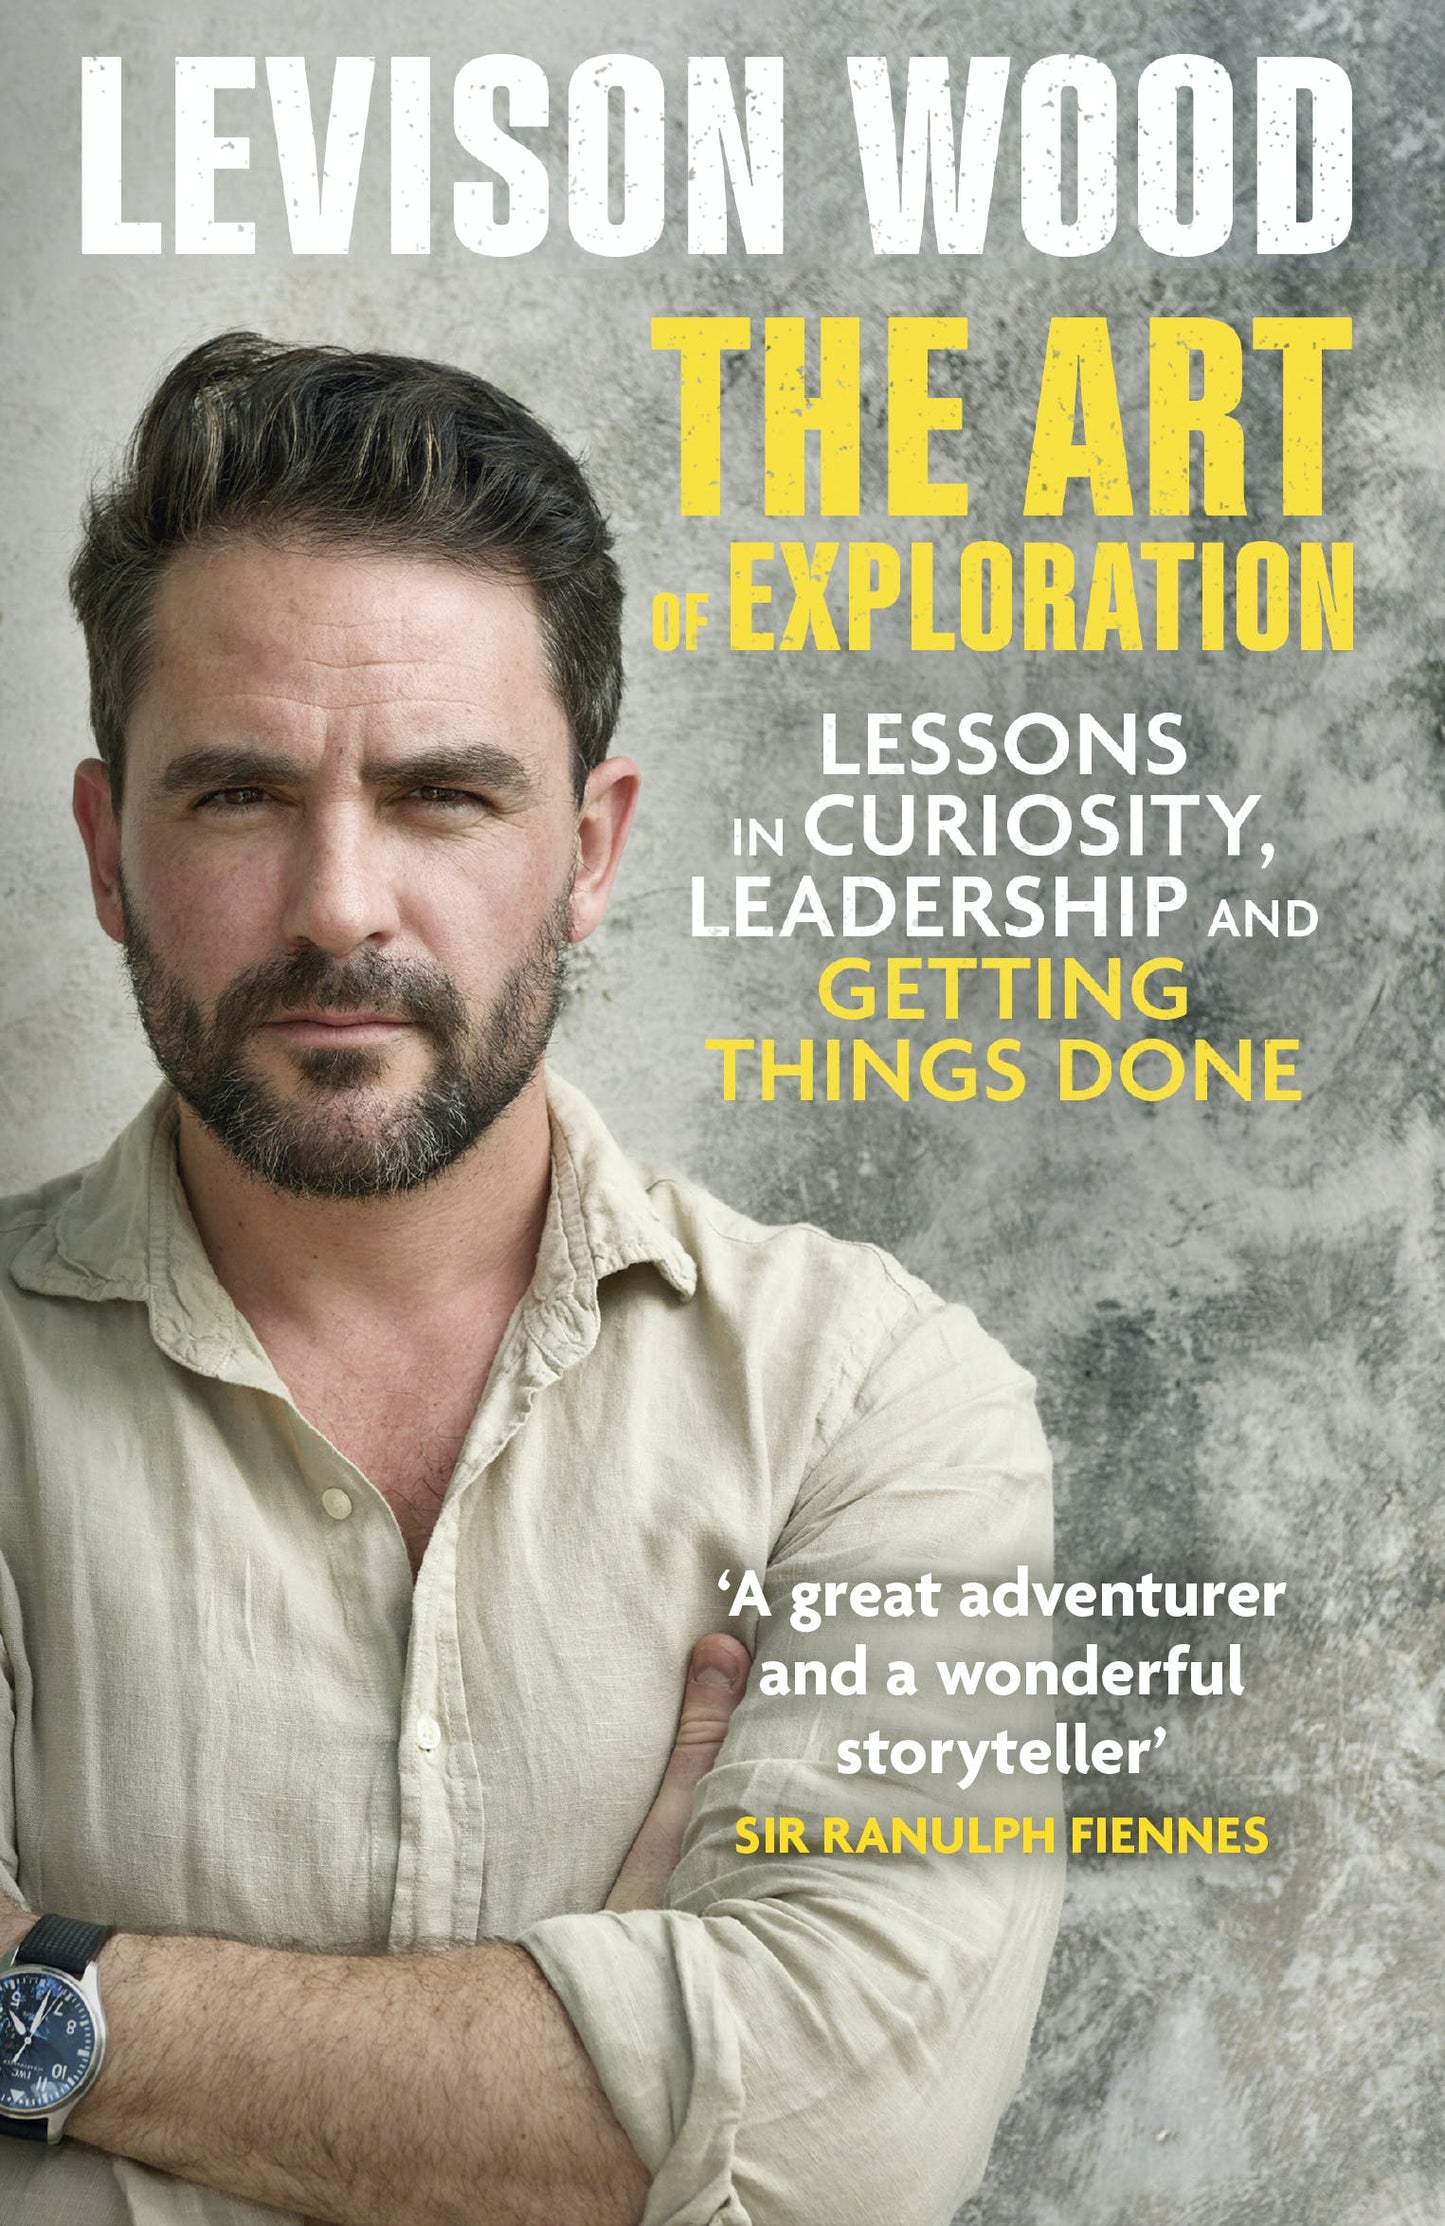 The Art of Exploration: Lessons in Curiosity, Leadership and Getting Things Done